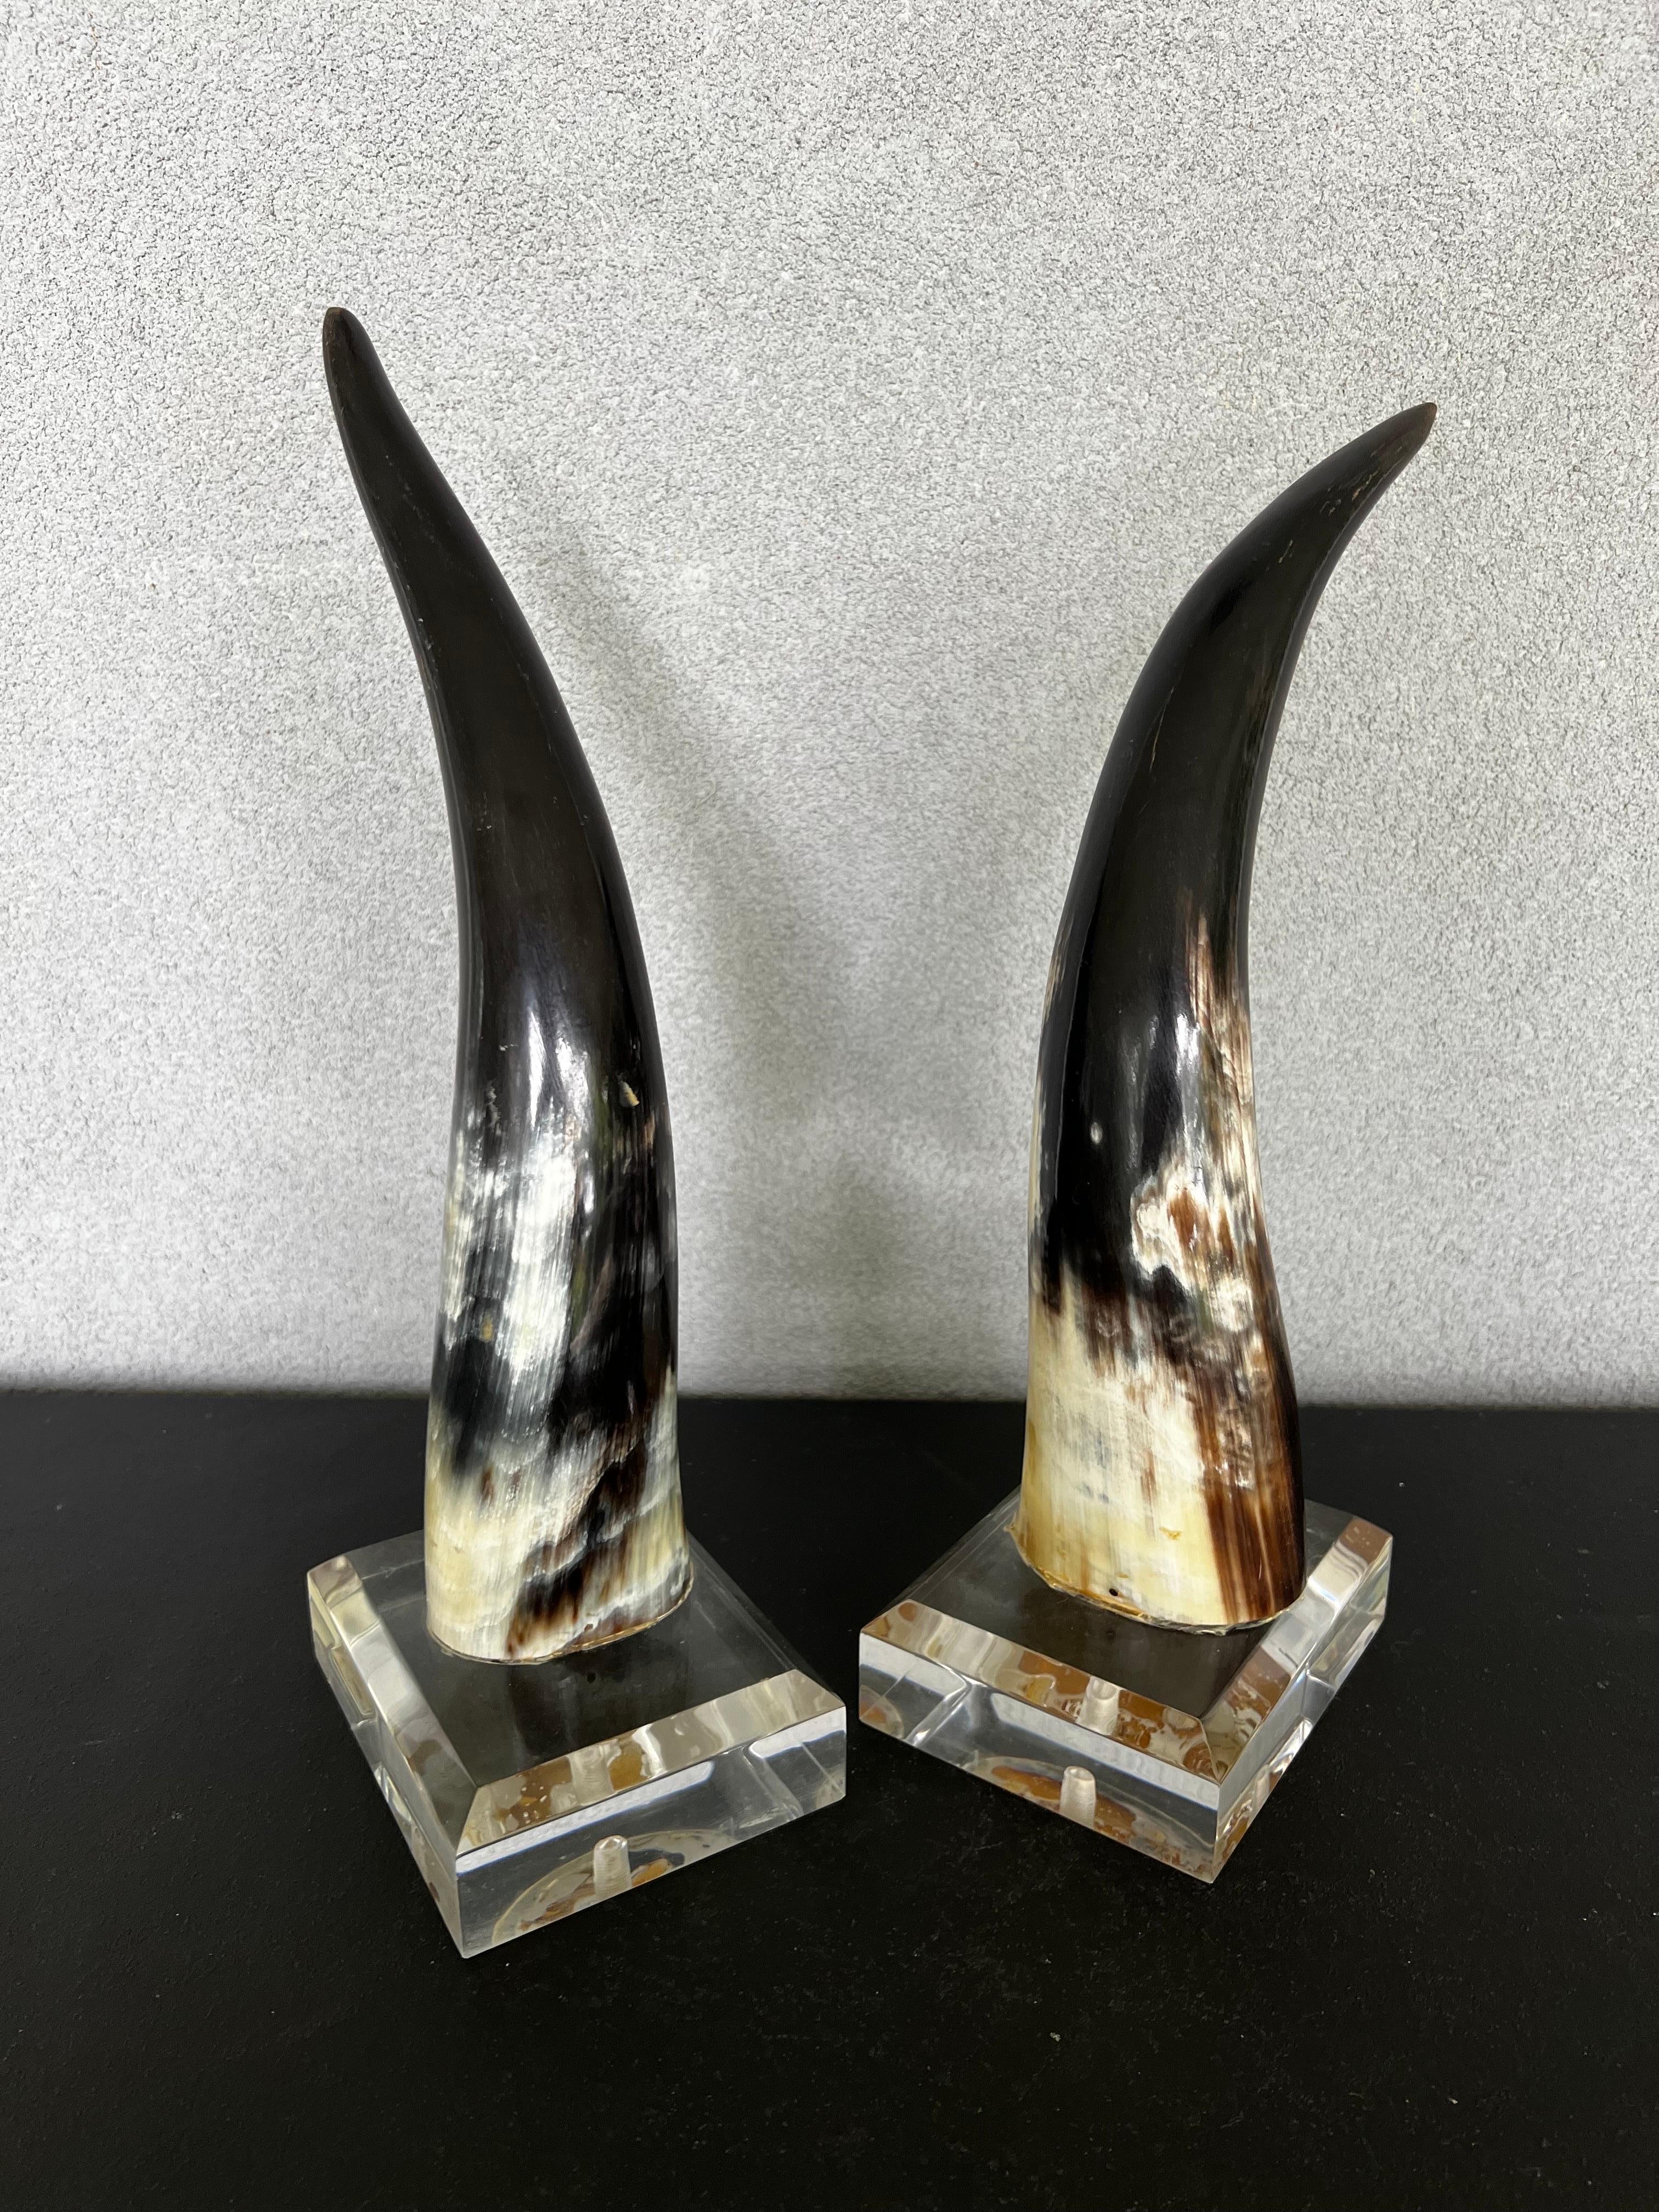 Pair of large mid century natural polished steer horns on Lucite bases, a beautiful natural pair, each one mounted on 4”x5” Lucite base.
stunning pair to add personality to any space. 